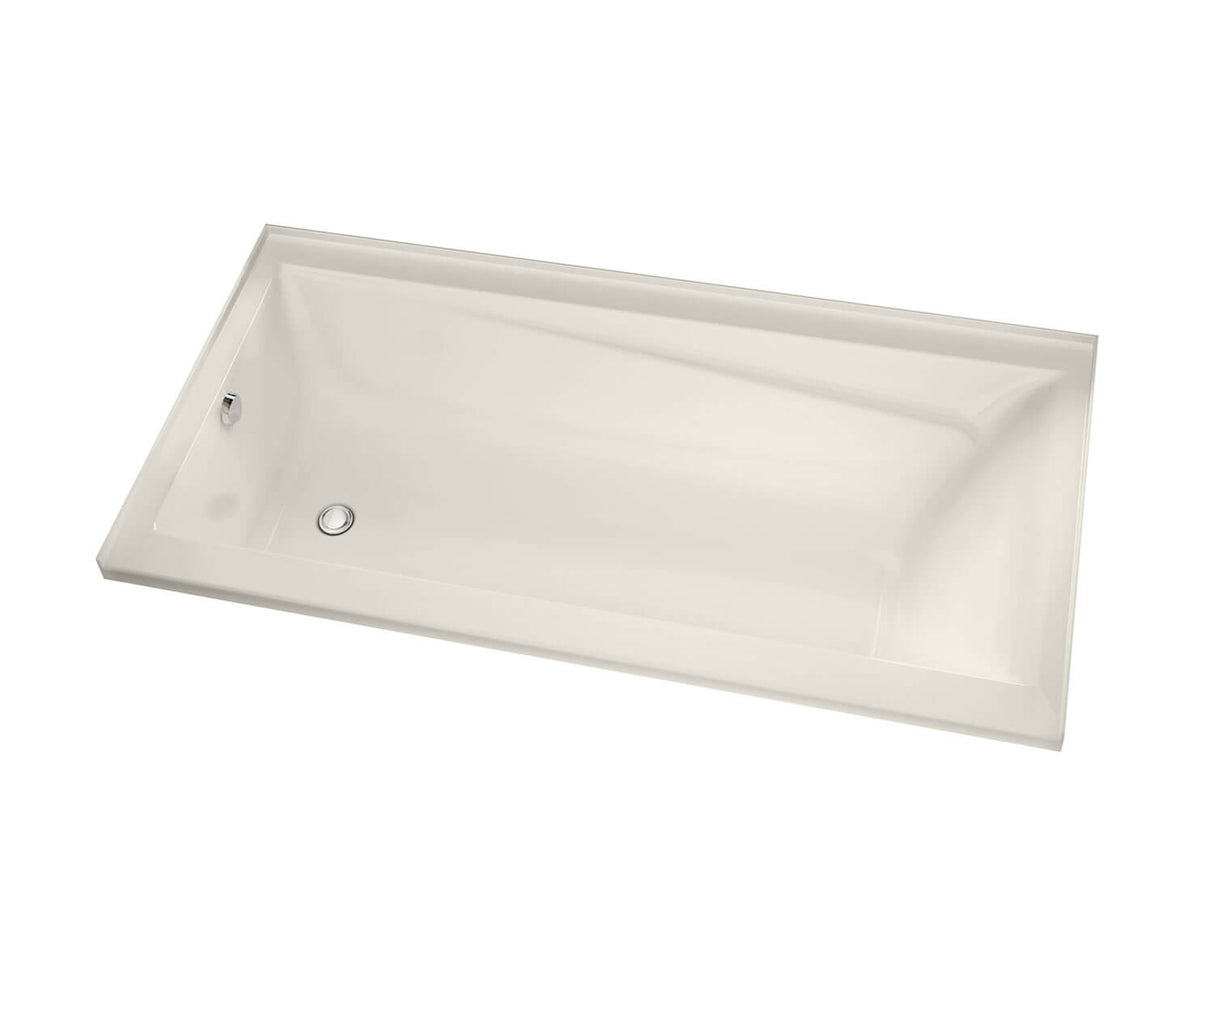 MAAX 106220-R-097-007 Exhibit 6632 IF Acrylic Alcove Right-Hand Drain Combined Whirlpool & Aeroeffect Bathtub in Biscuit